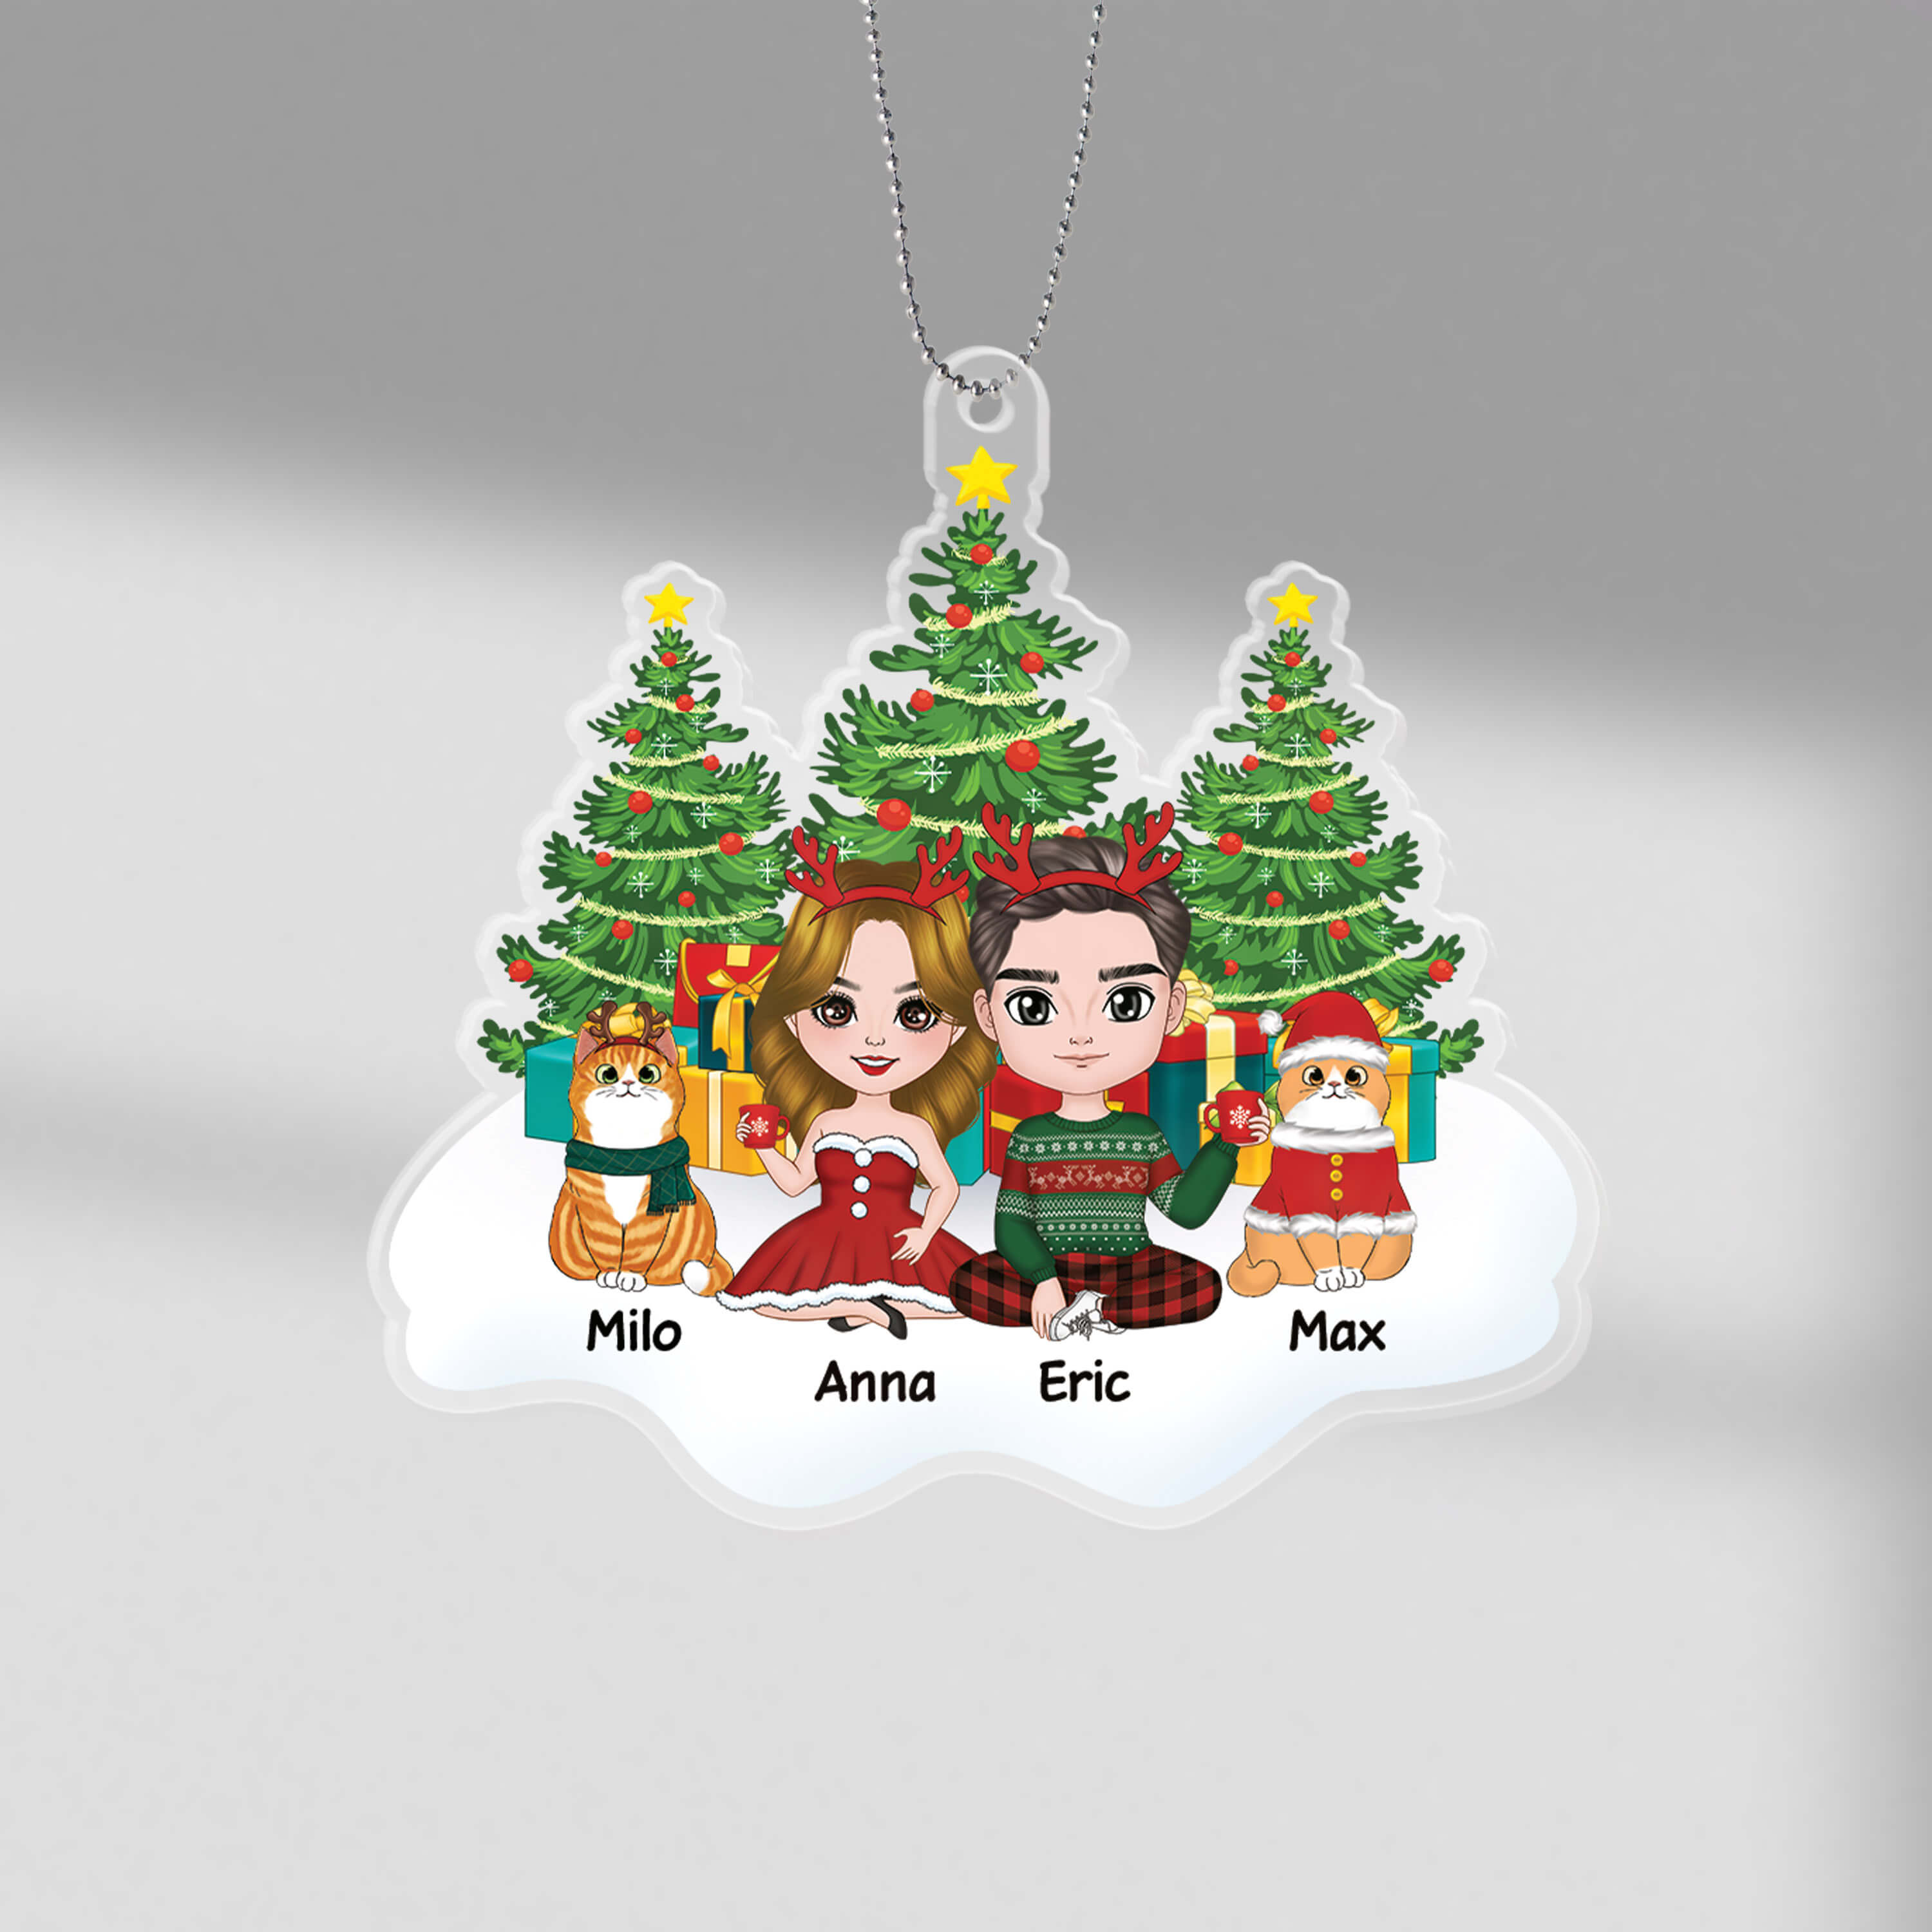 1406OUK1 personalised couple and cats sitting on snow christmas tree ornament